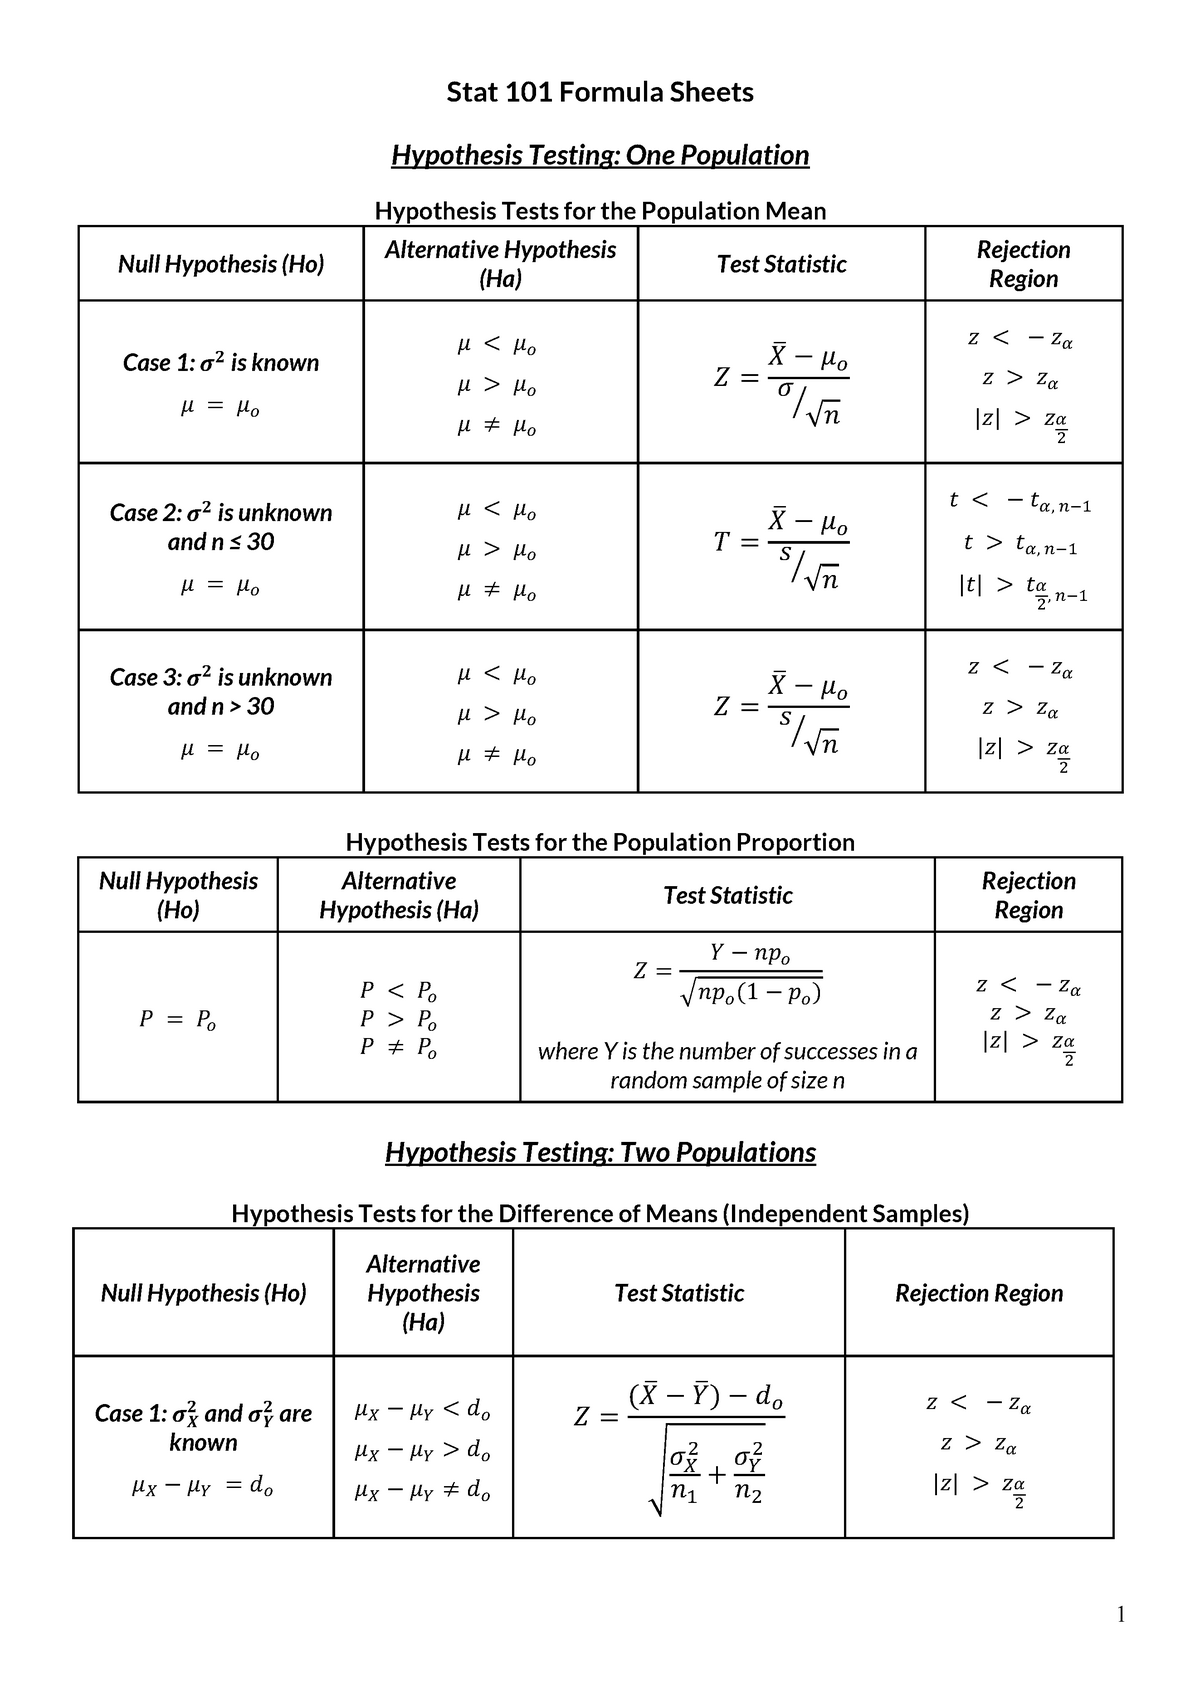 Hypothesis Worksheet Number 1 And 2